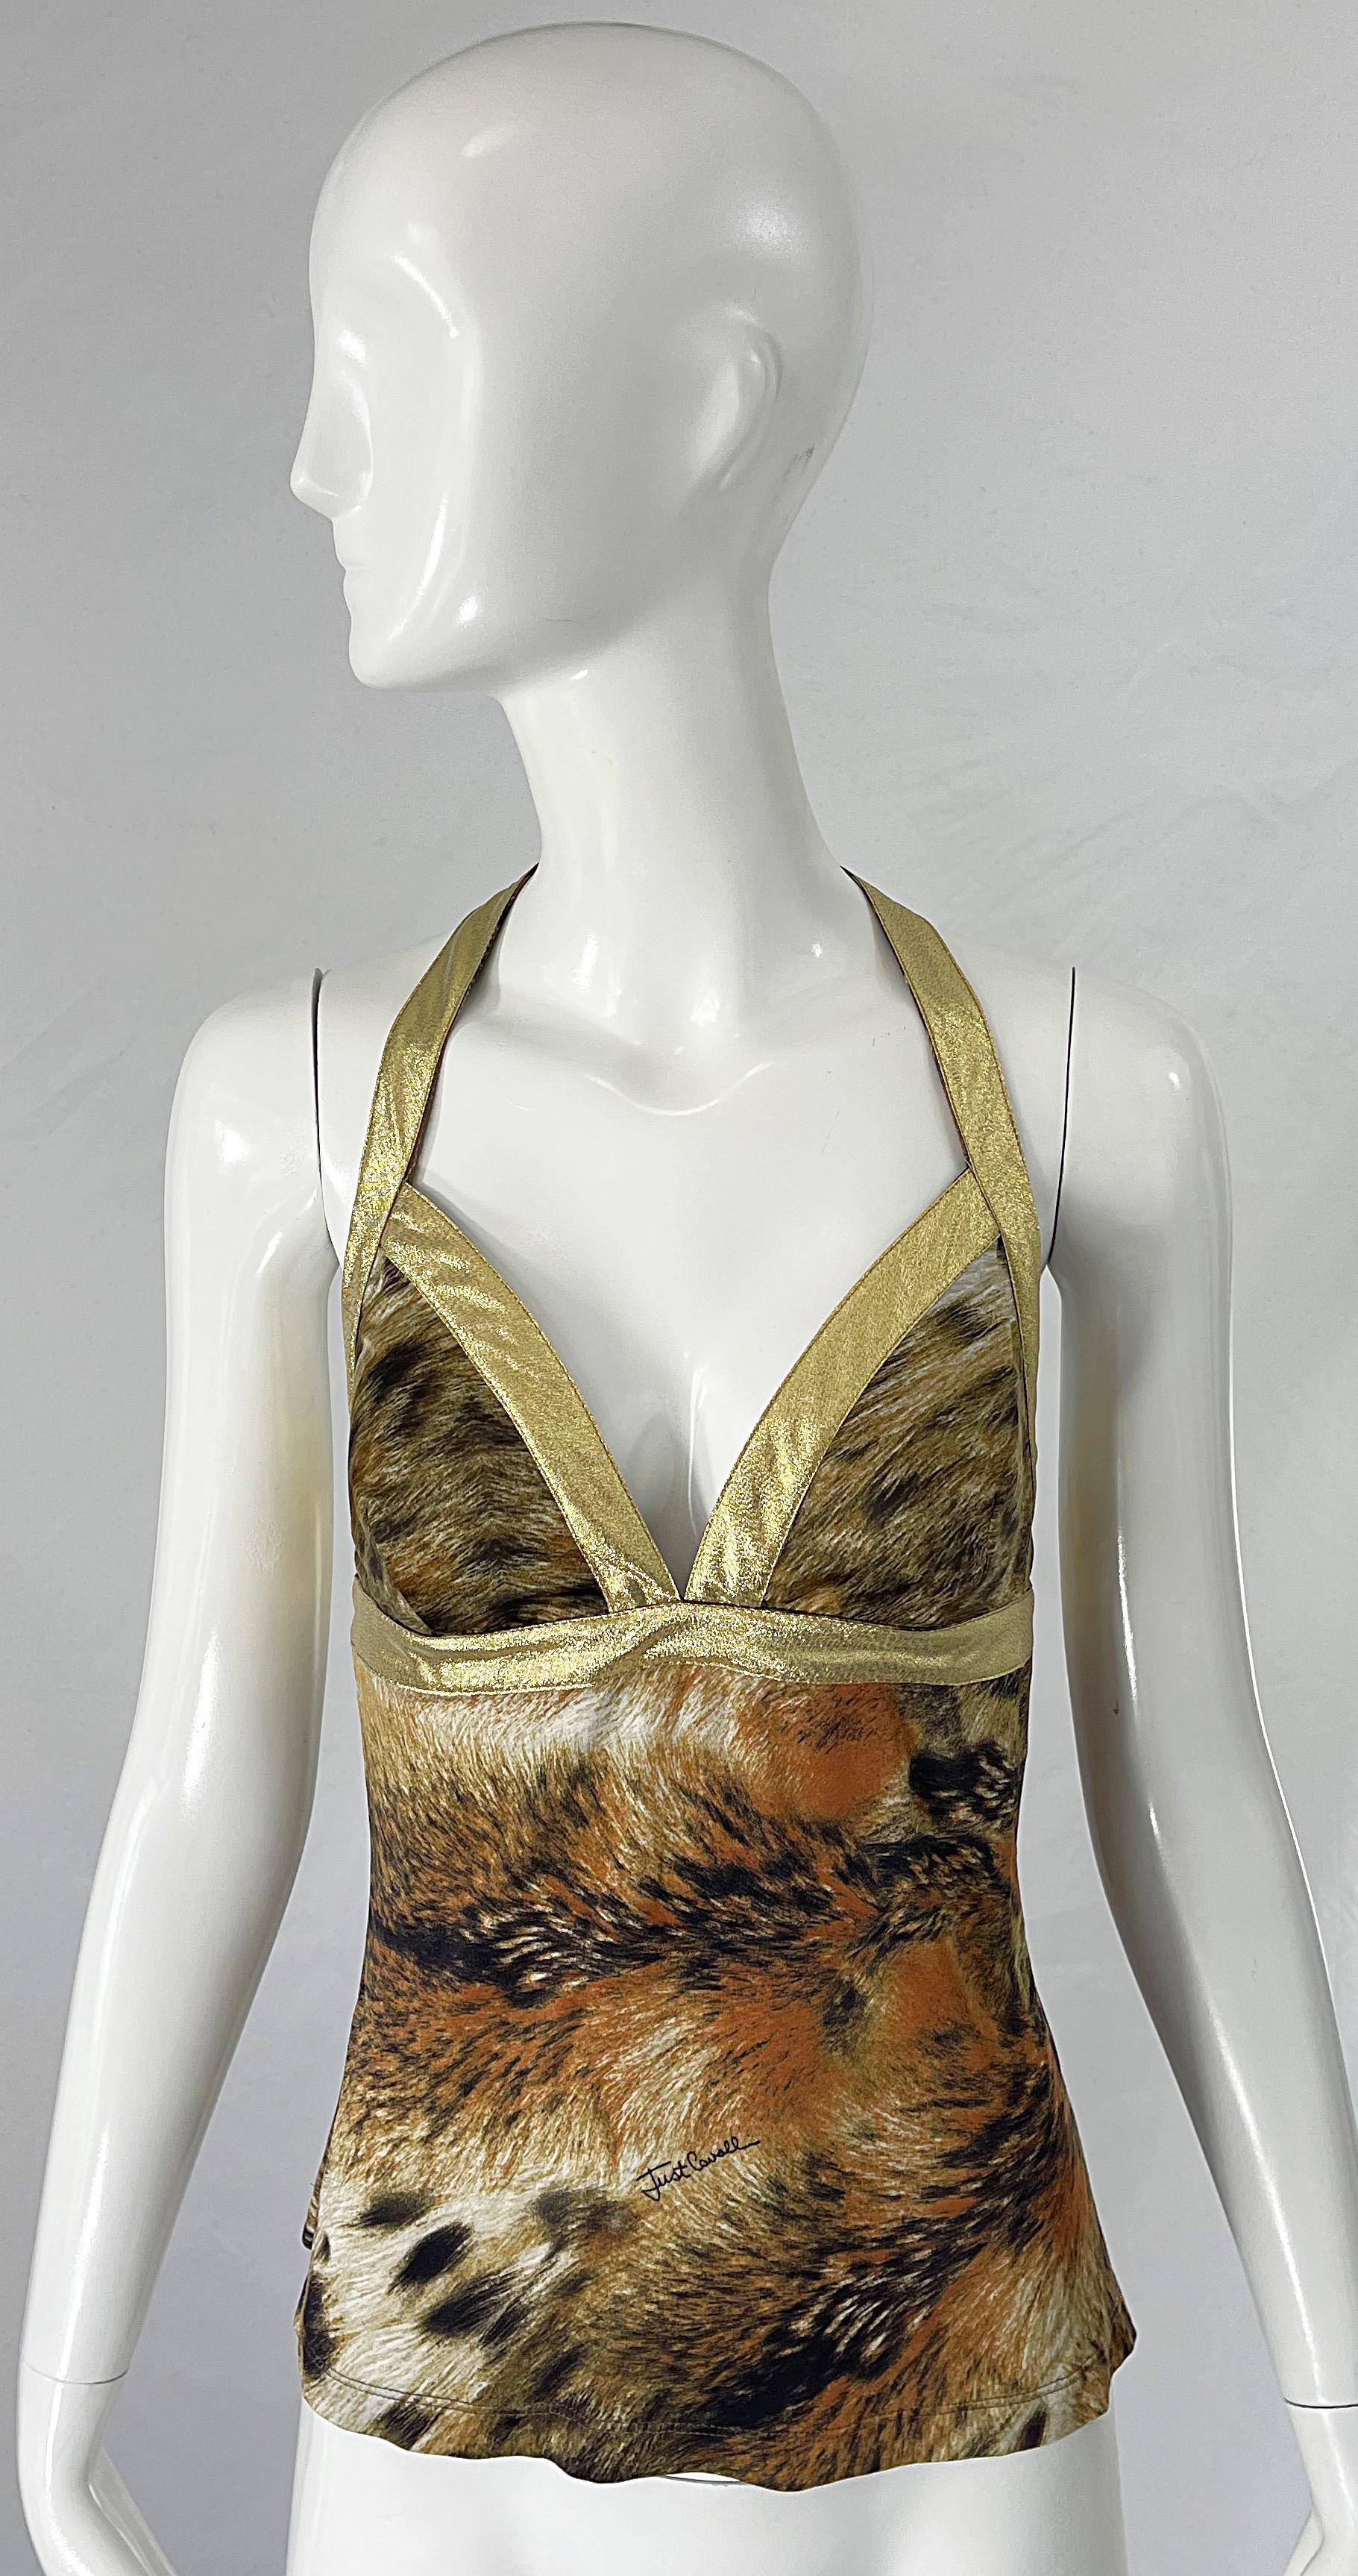 Sexy vintage early 2000s ROBERTO CAVALLI / Just Cavalli lion print and gold lame rayon jersey top ! Features an allover animal print with gold lame straps and racerback. Hidden zipper up the back with hook-and-eye closure. Can easily be dressed up